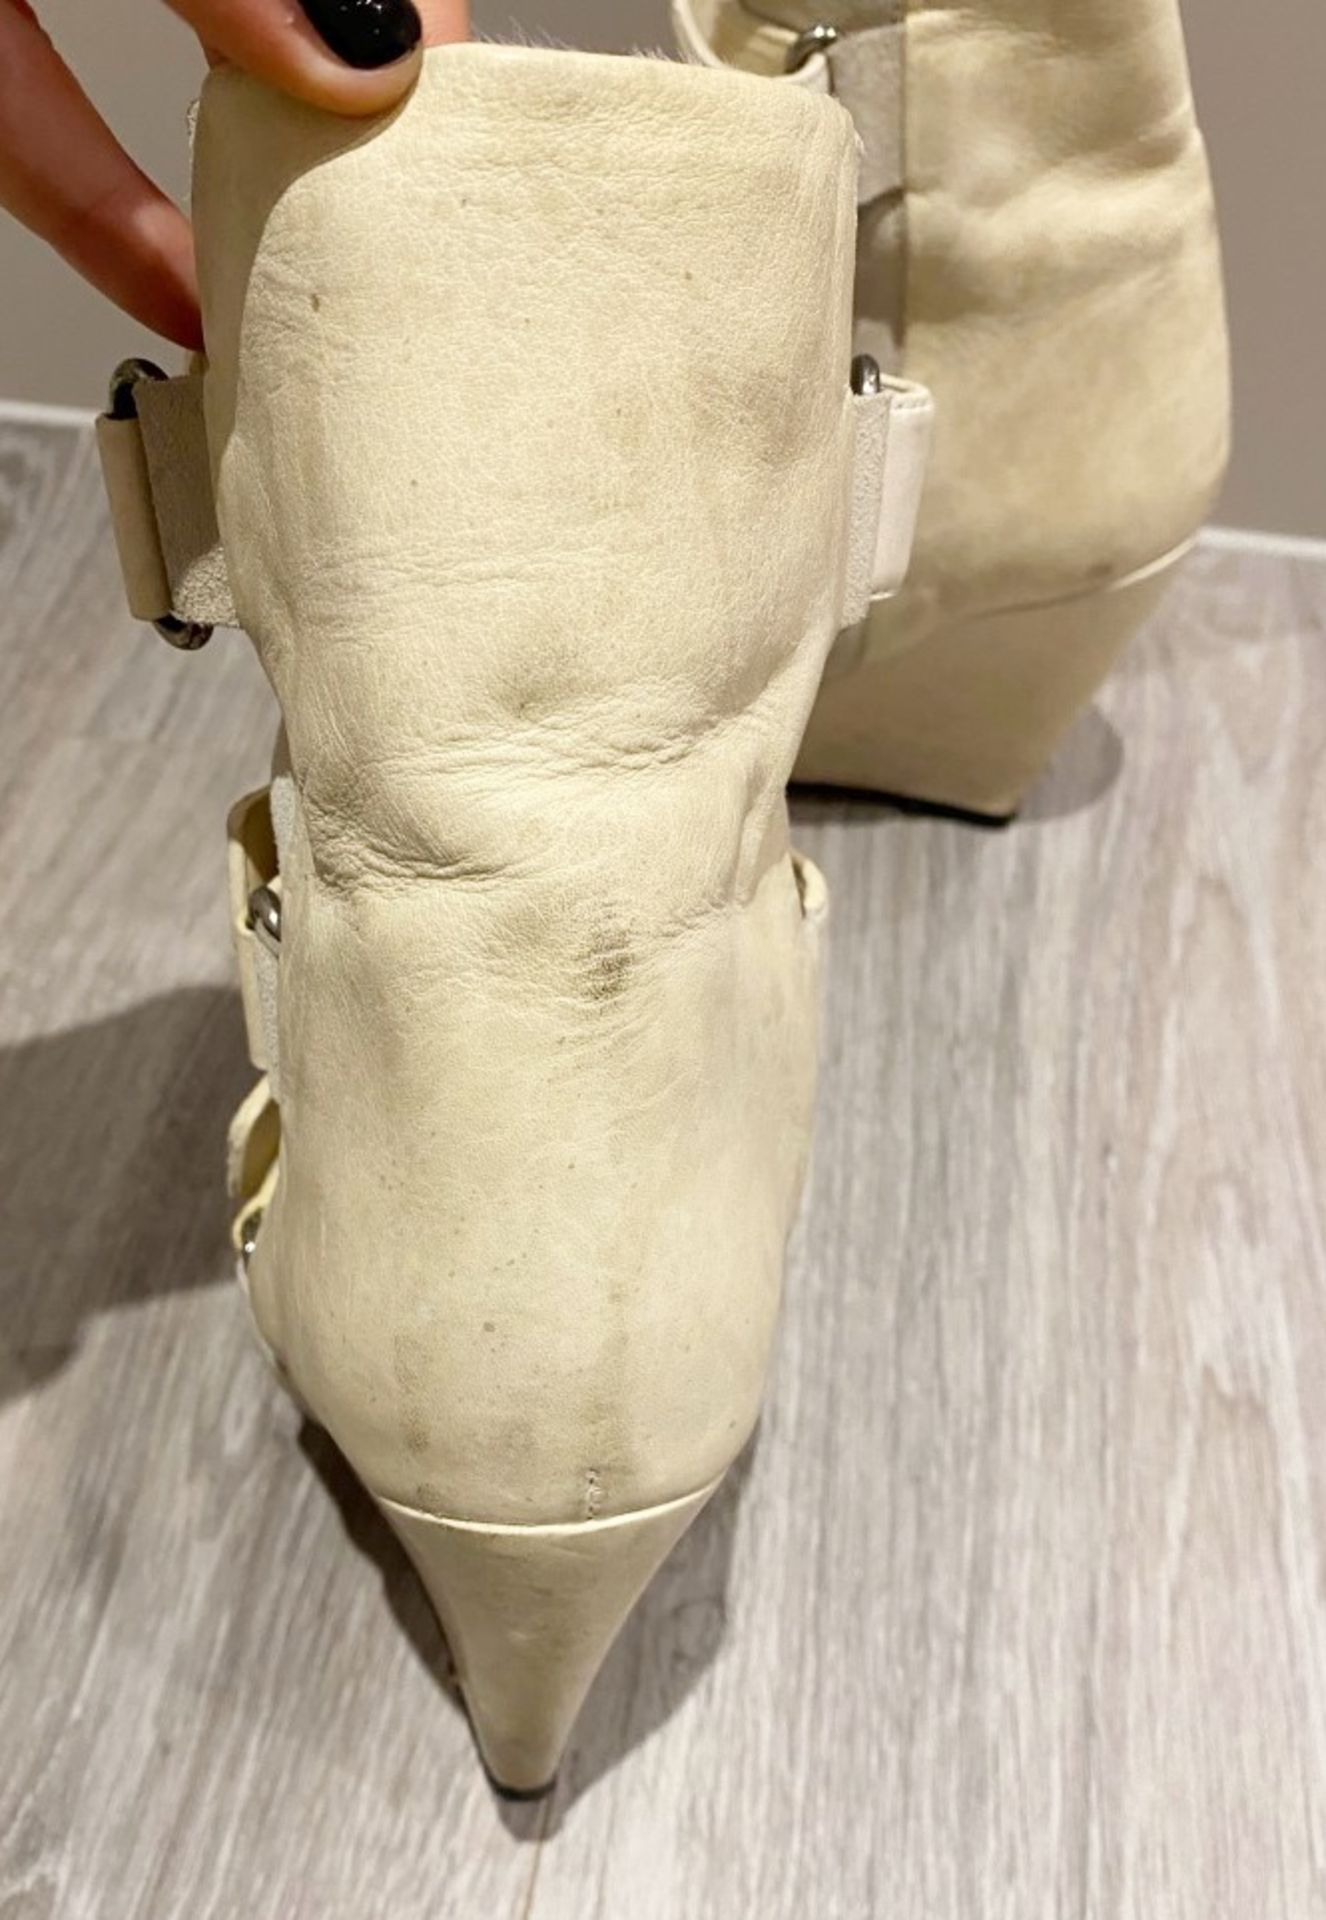 1 x Pair Of Genuine Isabel Marant Boots In Crème And Fur - Size: 37 - Preowned in Very Good Conditio - Image 4 of 5